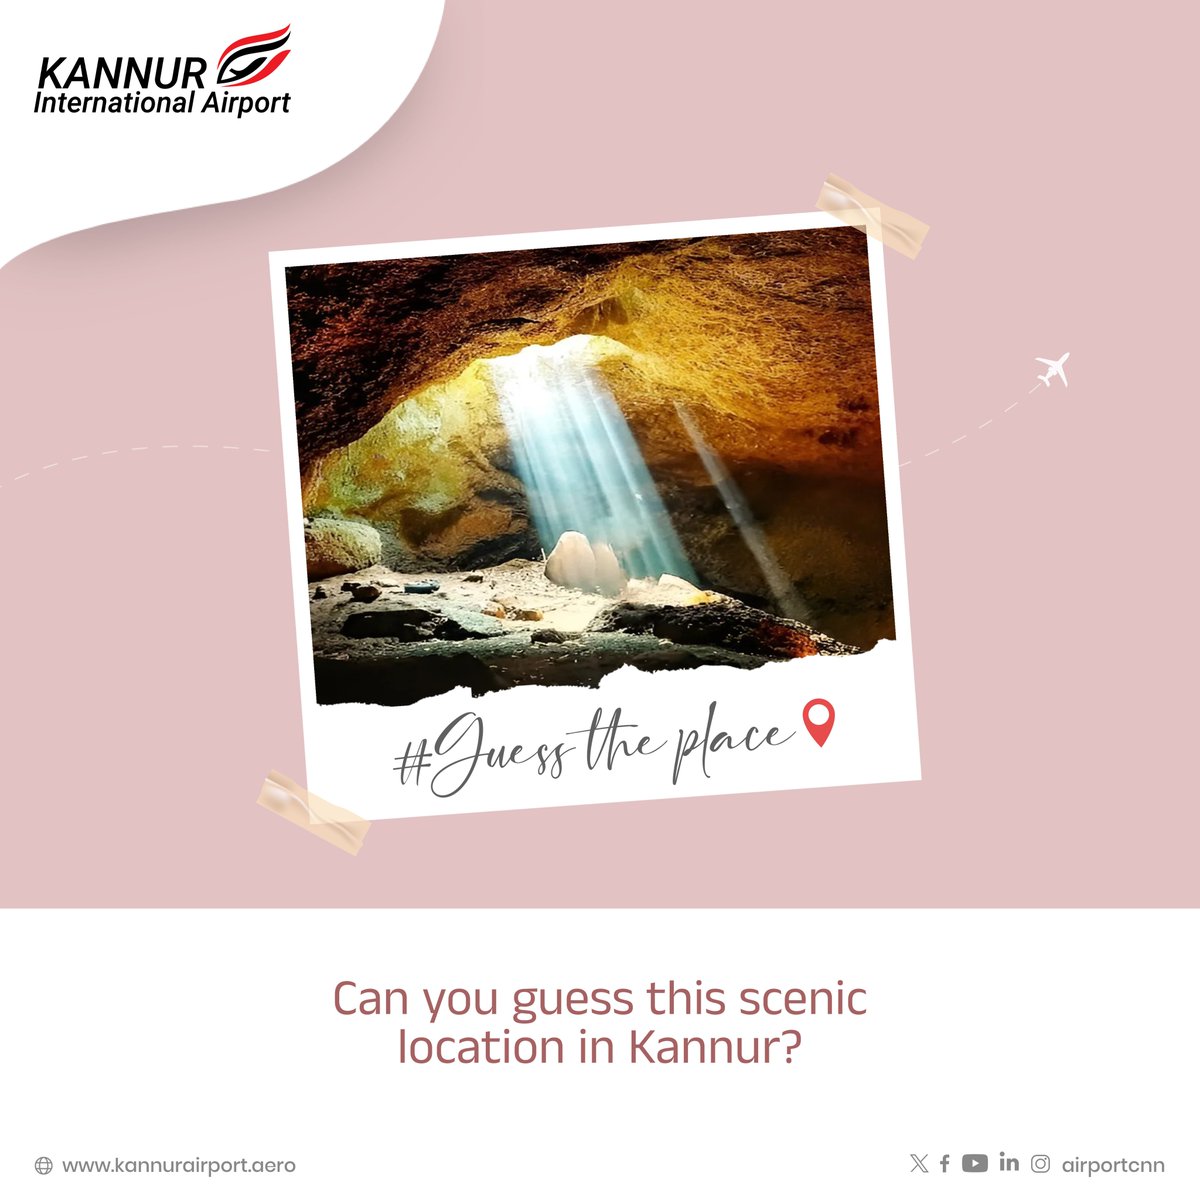 Dive into the allure of Kannur's hidden gems! Can you guess the name of this scenic location waiting to be discovered in Kannur? Share your guesses and let's embark on a journey of exploration together!

#KannurInternationalAirport #GuesstheSpot #Kannur #tourism